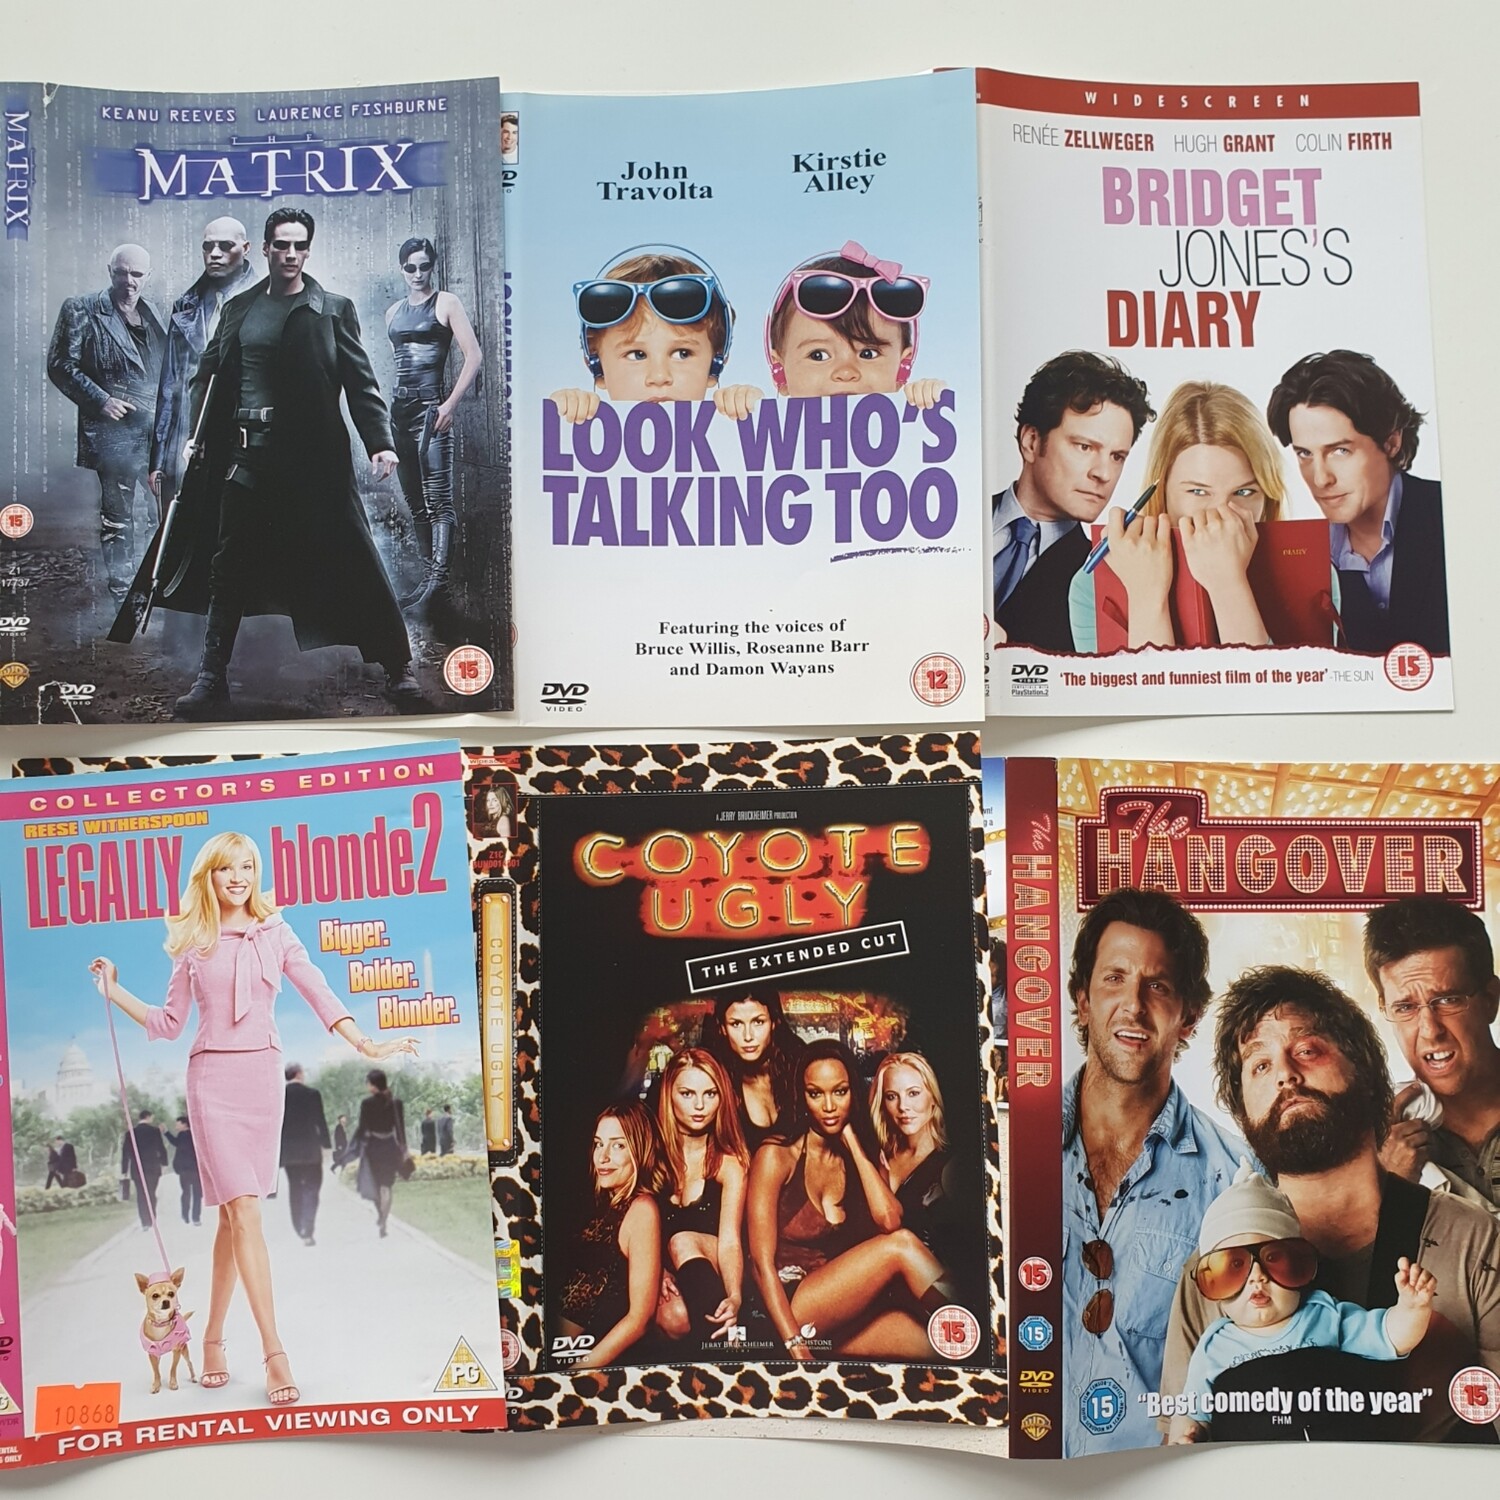 DVD notebooks - COMEDY & CLASSICS made with metal book corners